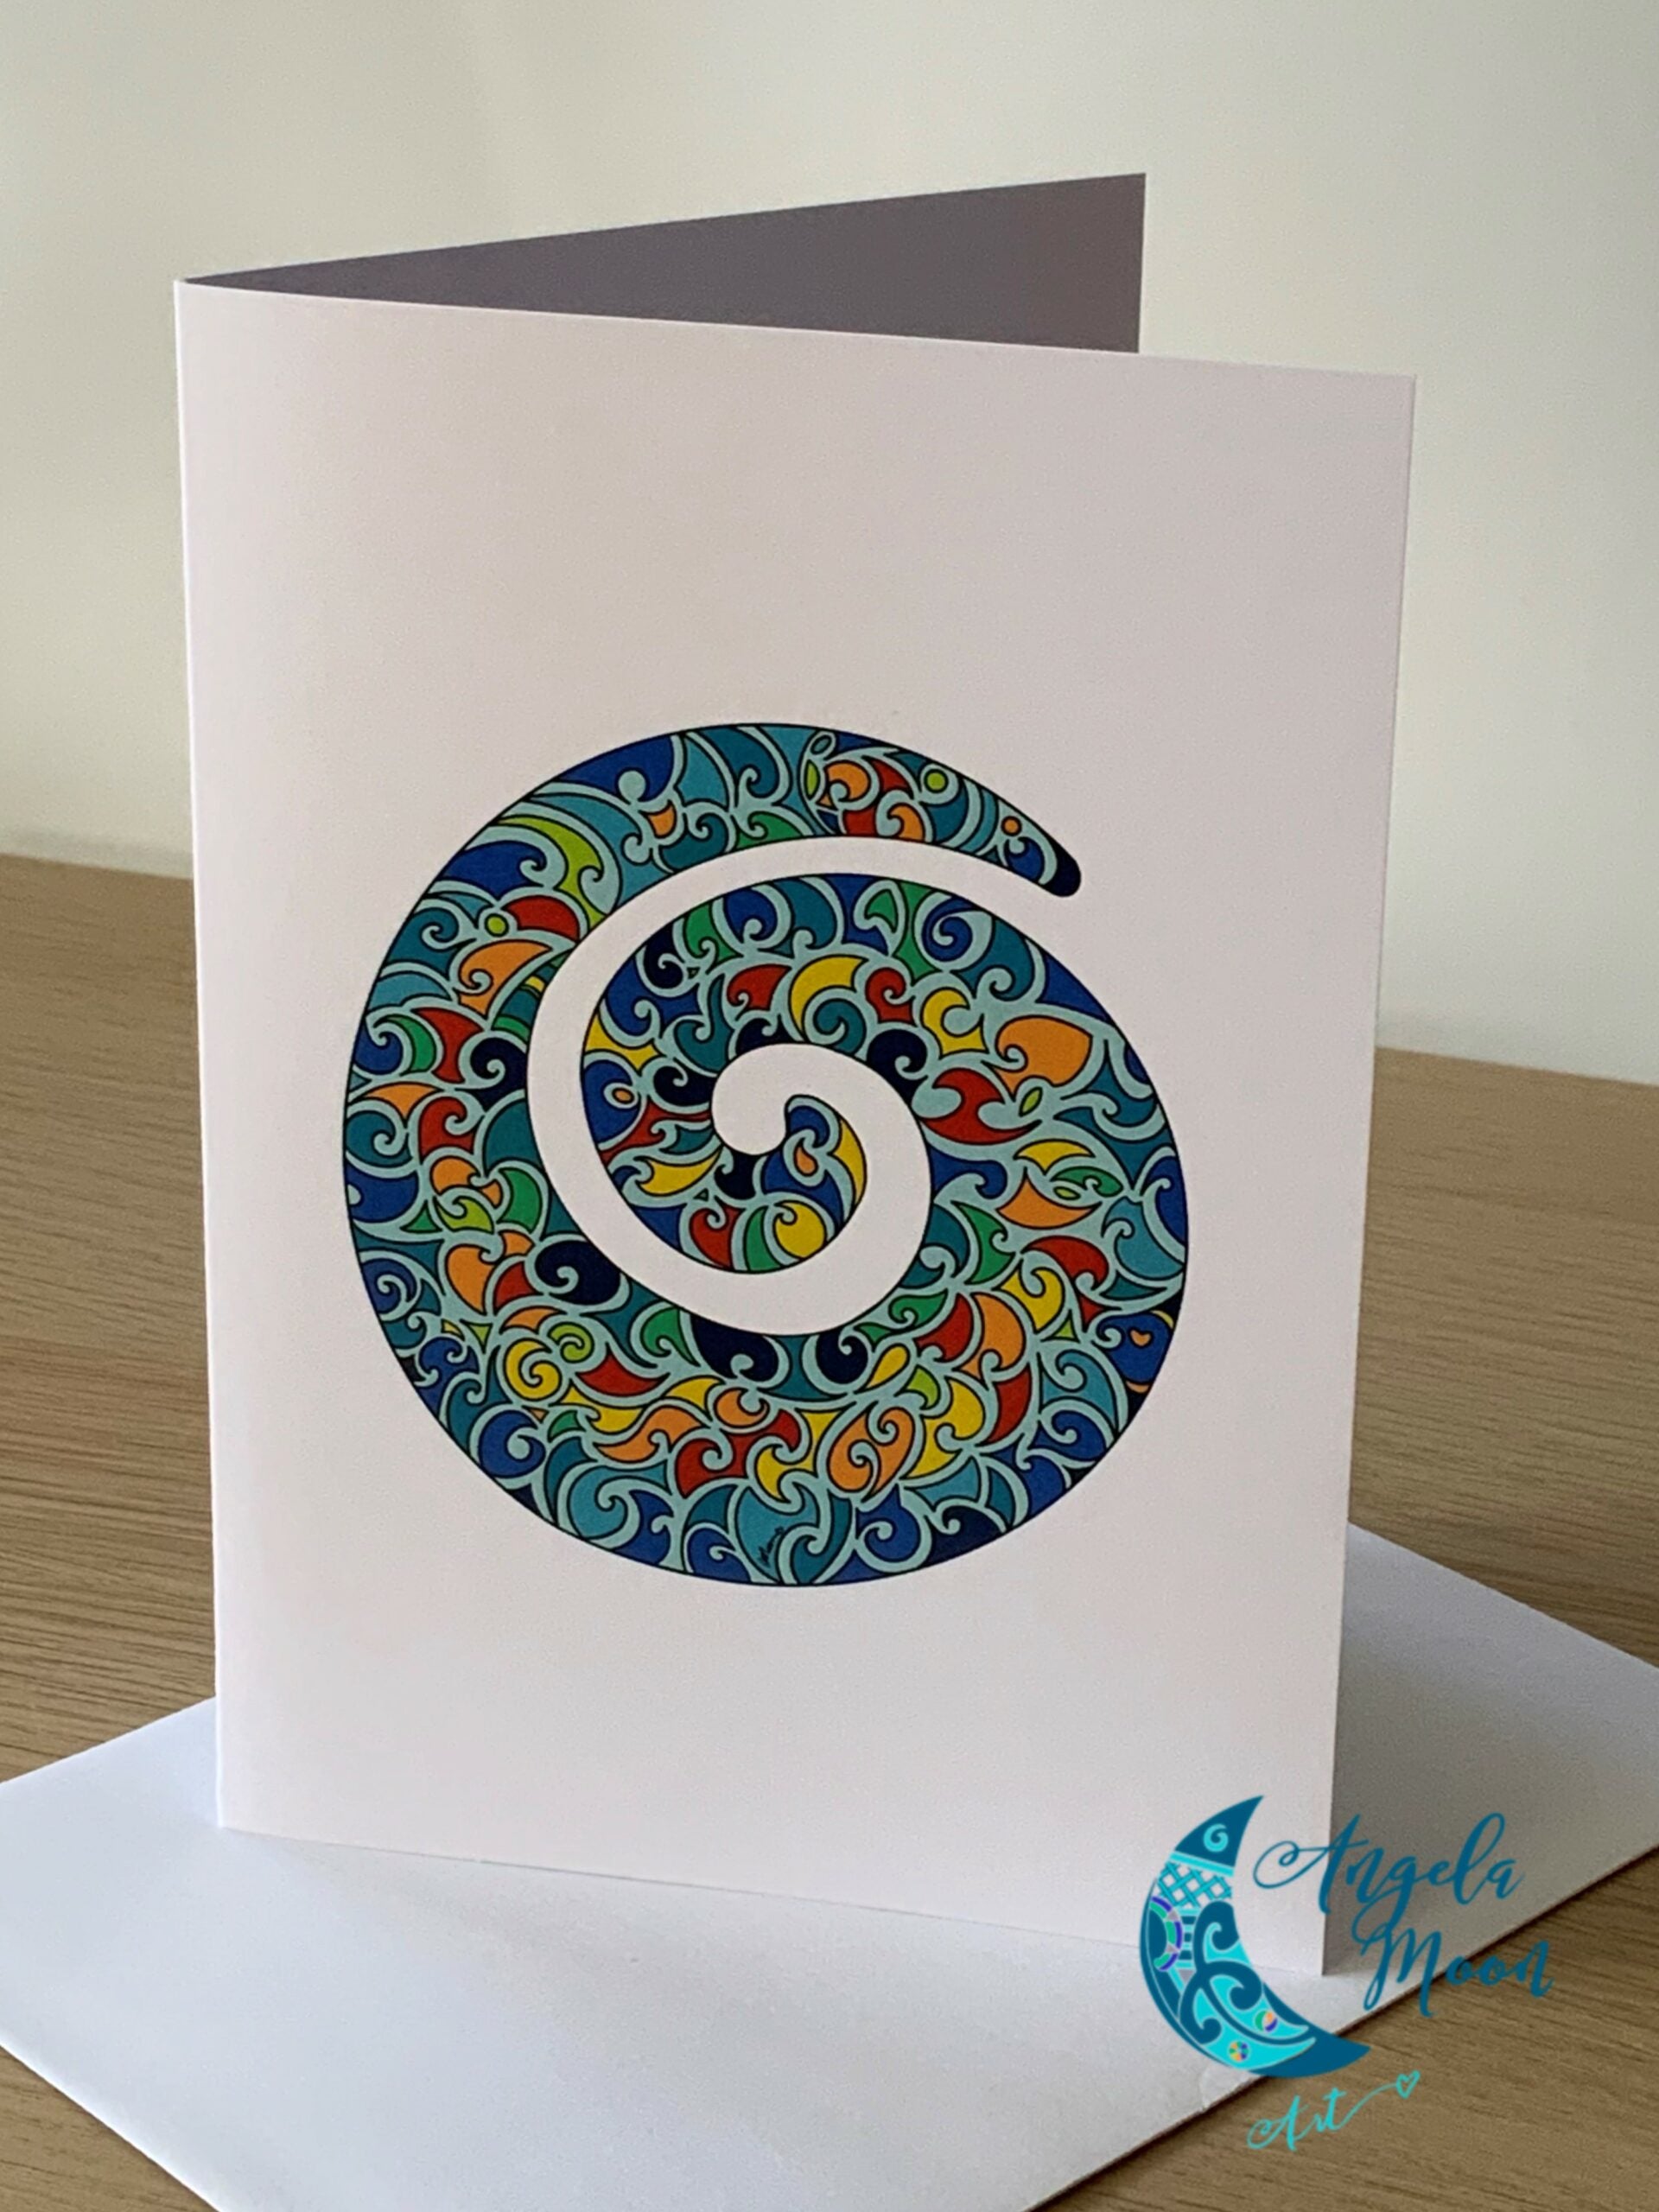 A colorful and intricately designed Angela Moon Art Koru Fern Frond Card with a spiral pattern resembling a paisley, displayed with its envelope on a wooden surface.